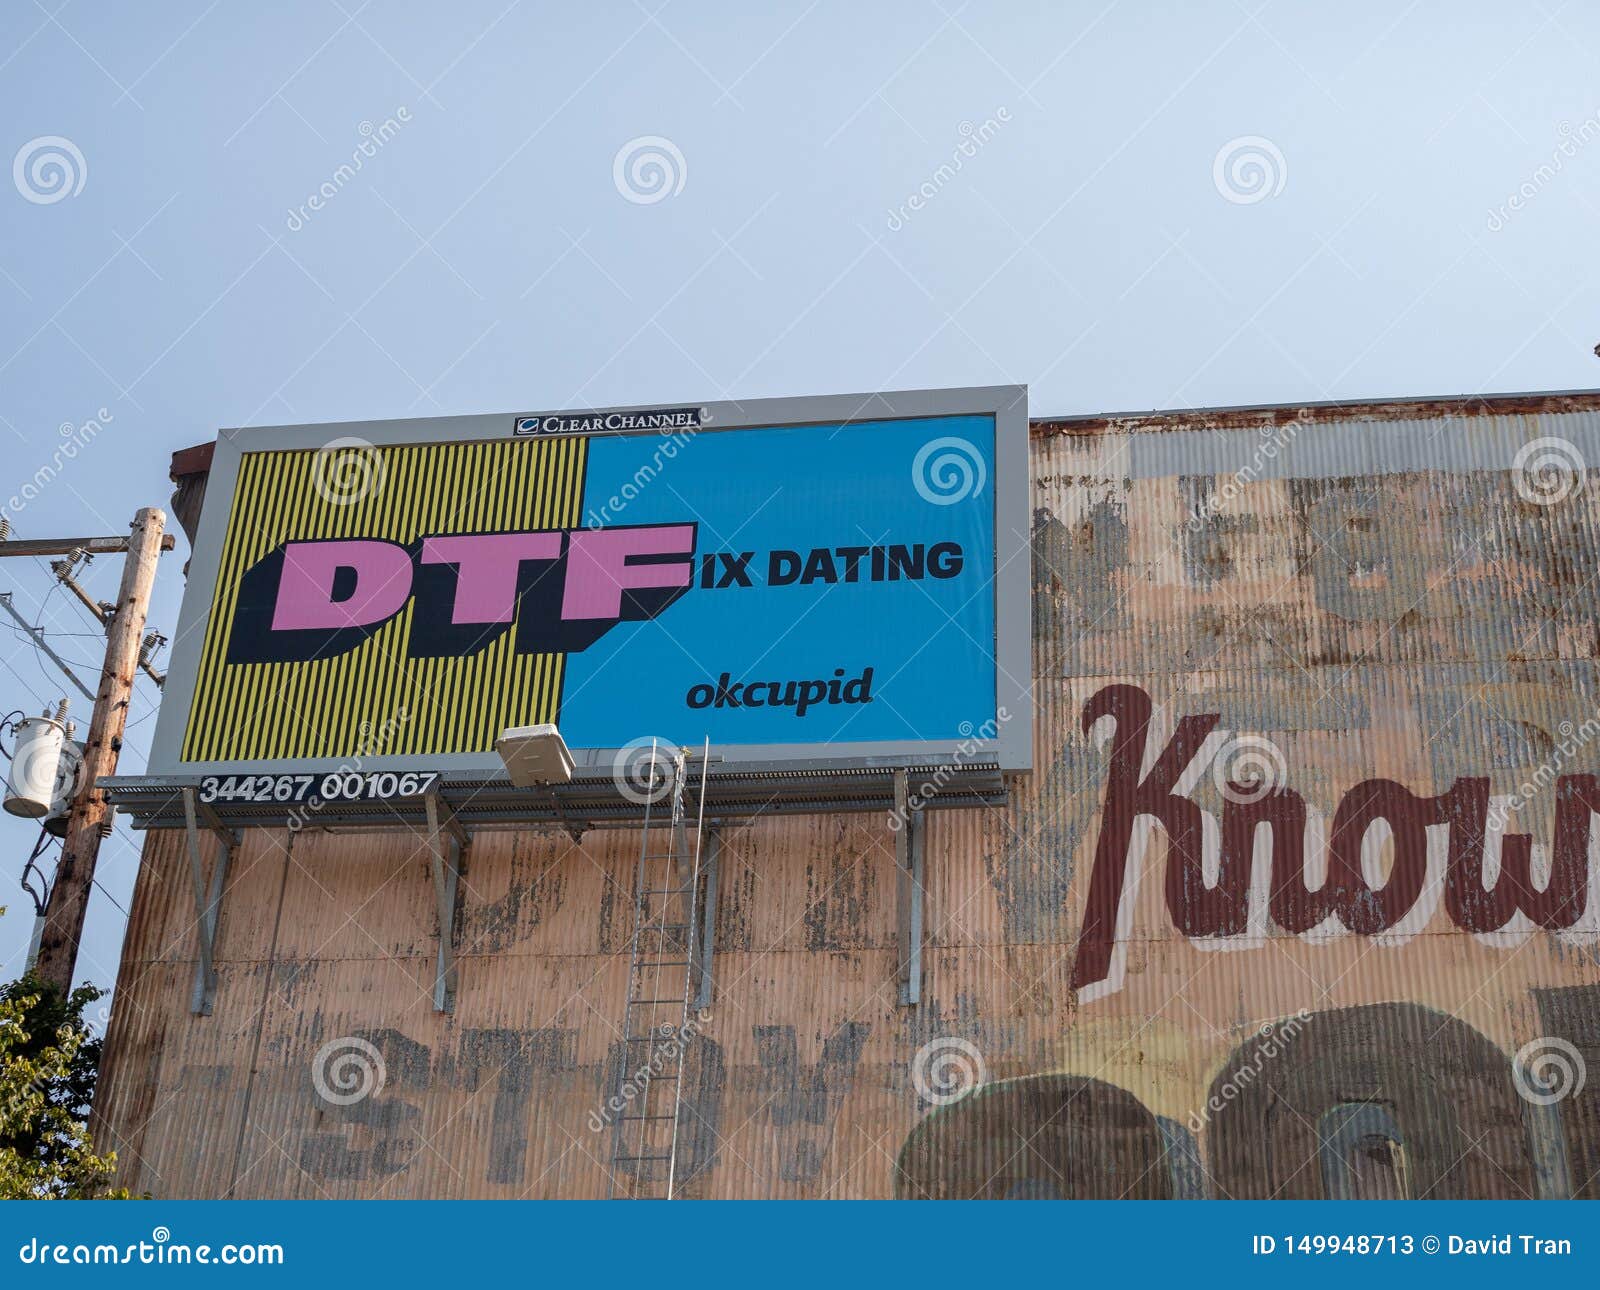 dtf dating